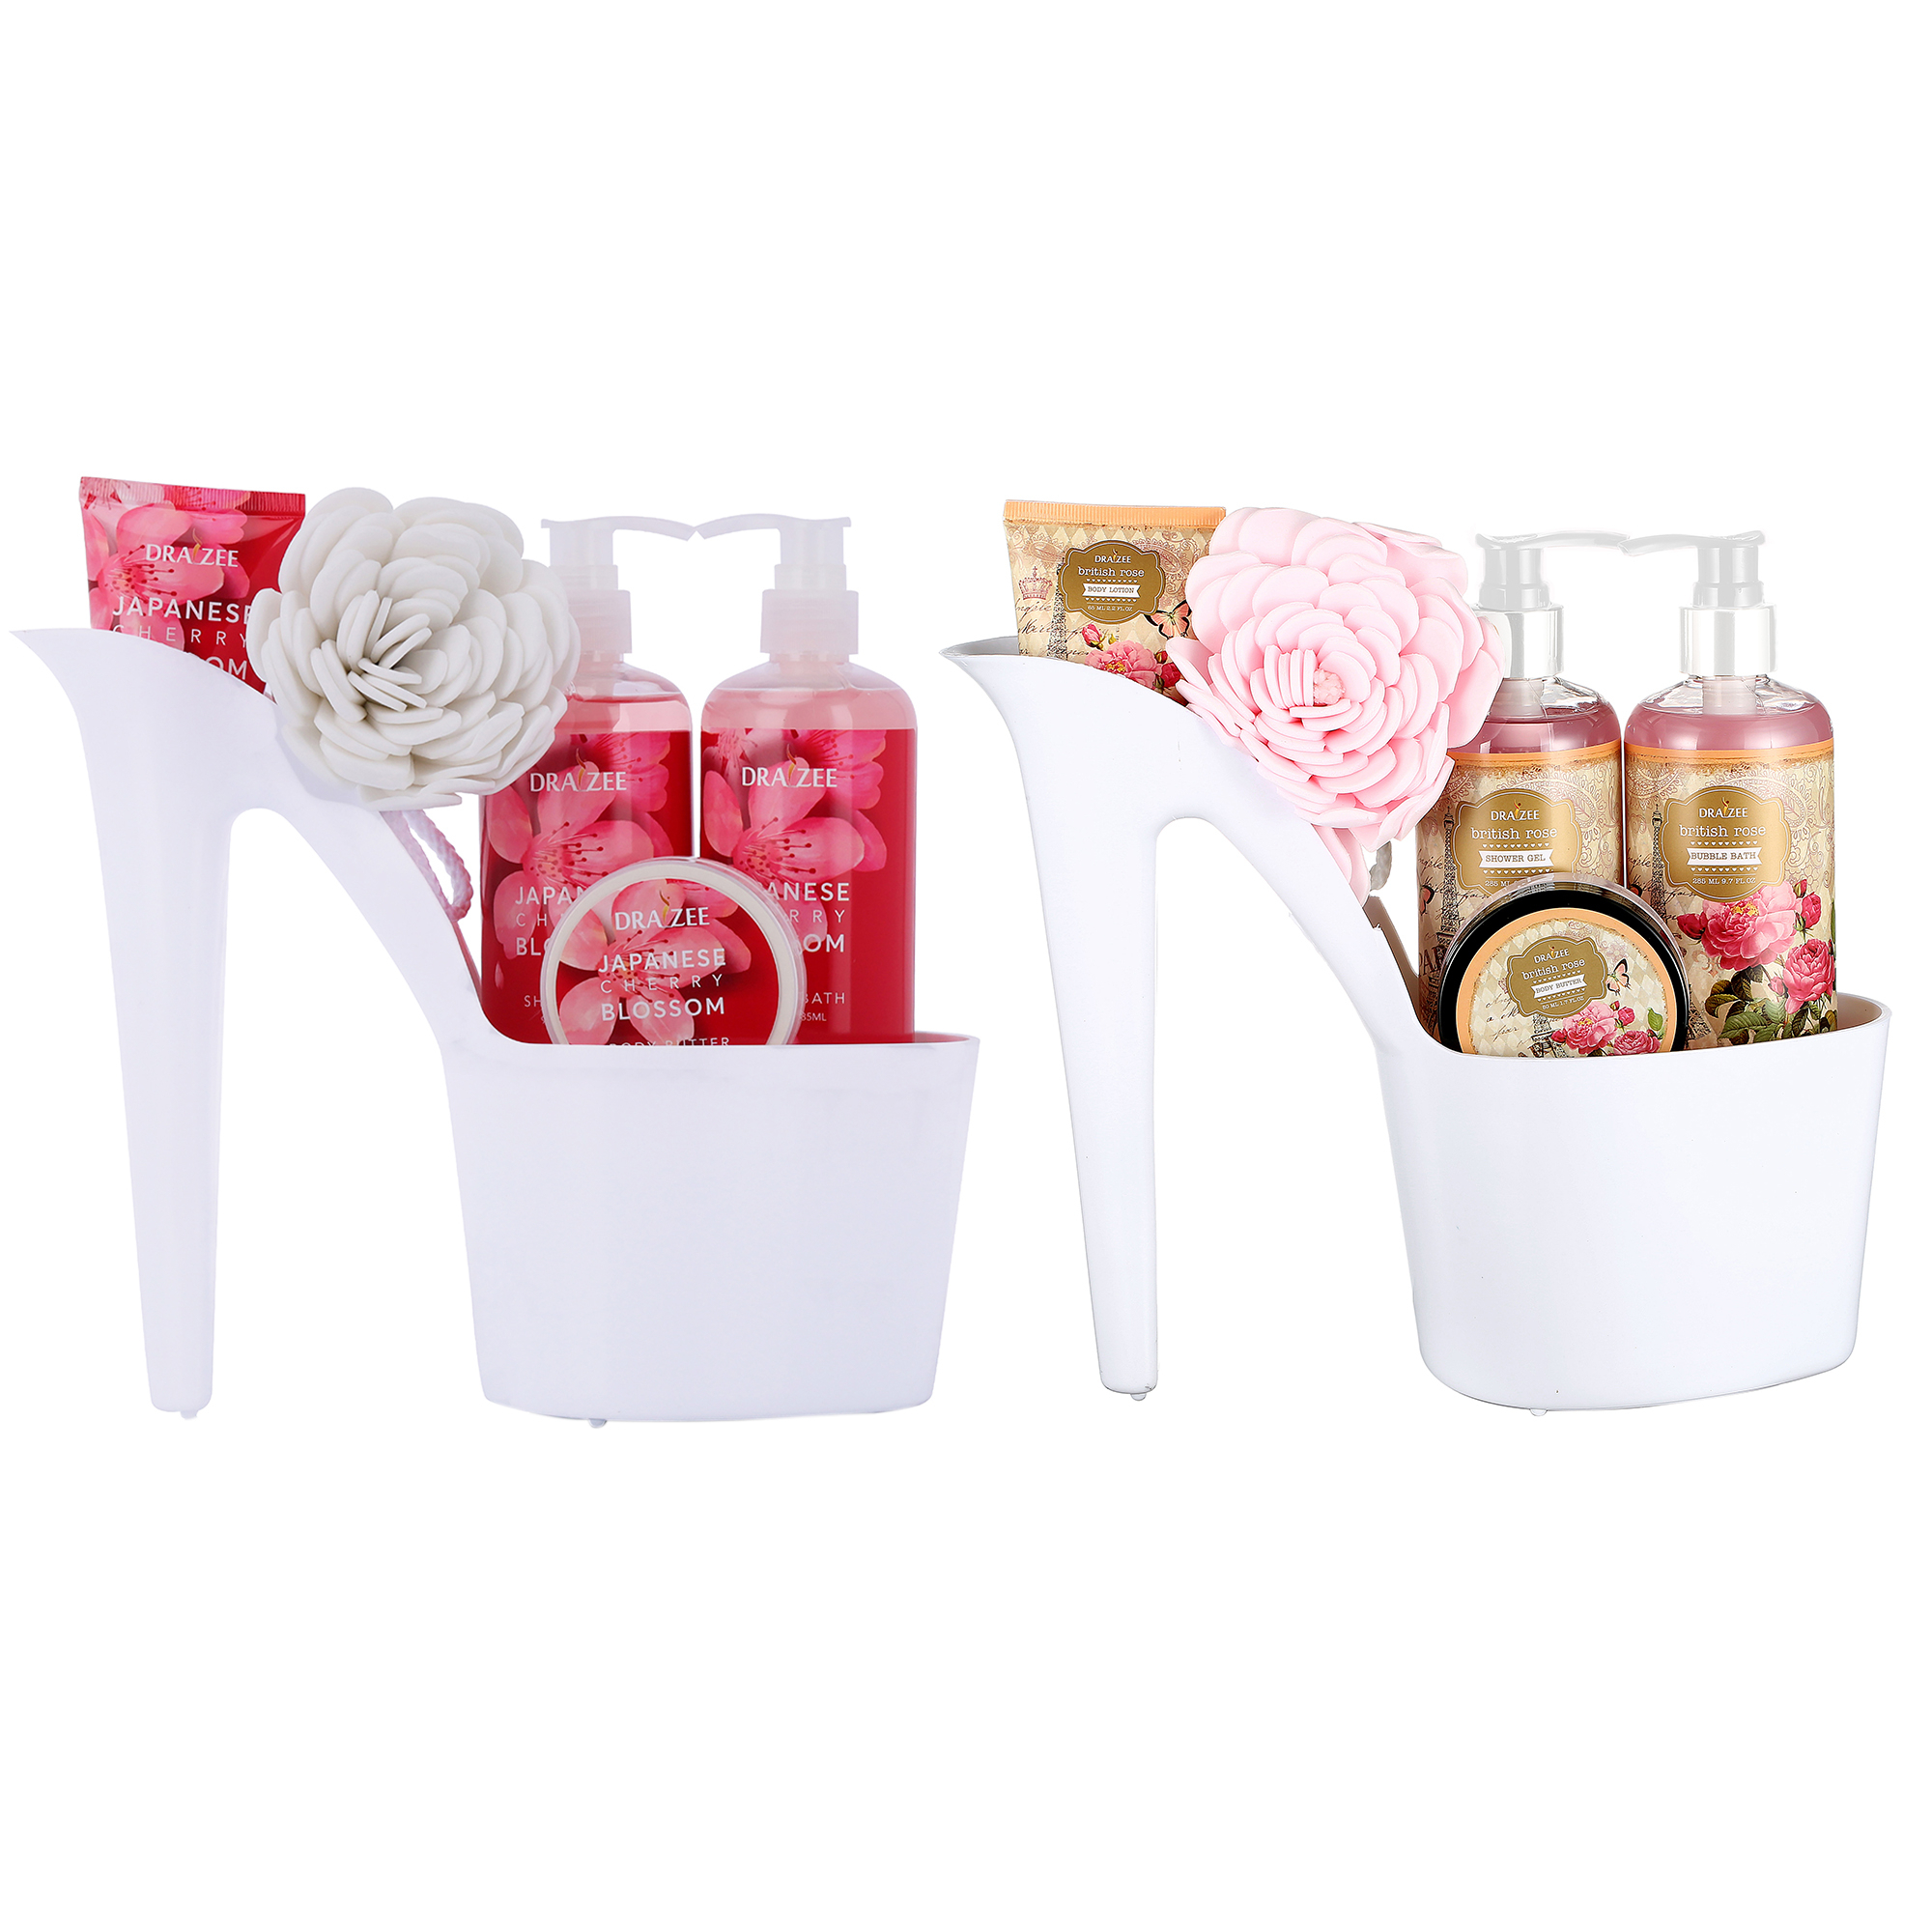 Set Of 2 Draizee 10 Pcs Scented Spa Gift Basket Rose, Cherry With Shower Gel, Bubble Bath, Body Butter & Lotion, Soft Bath Puff